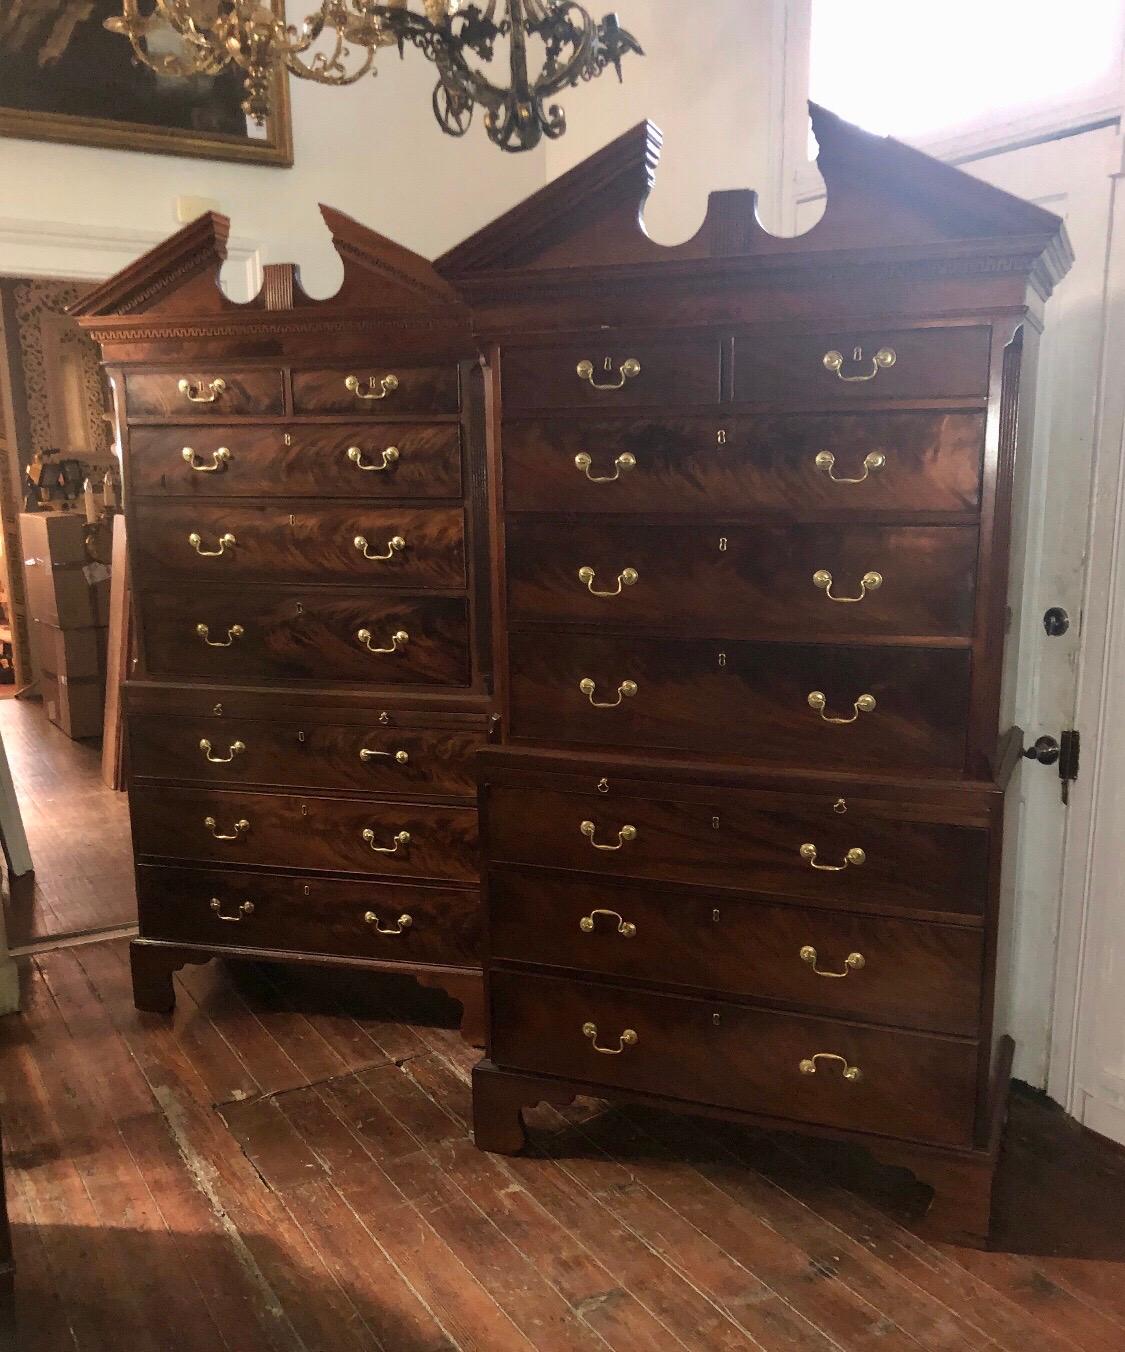 This rare pair of George III period mahogany Chippendale chest on chest with broken arch pediments have dressing / brushing slides. These finely crafted chest on chest come in three parts having graduated drawers with swan neck pulls and terminating